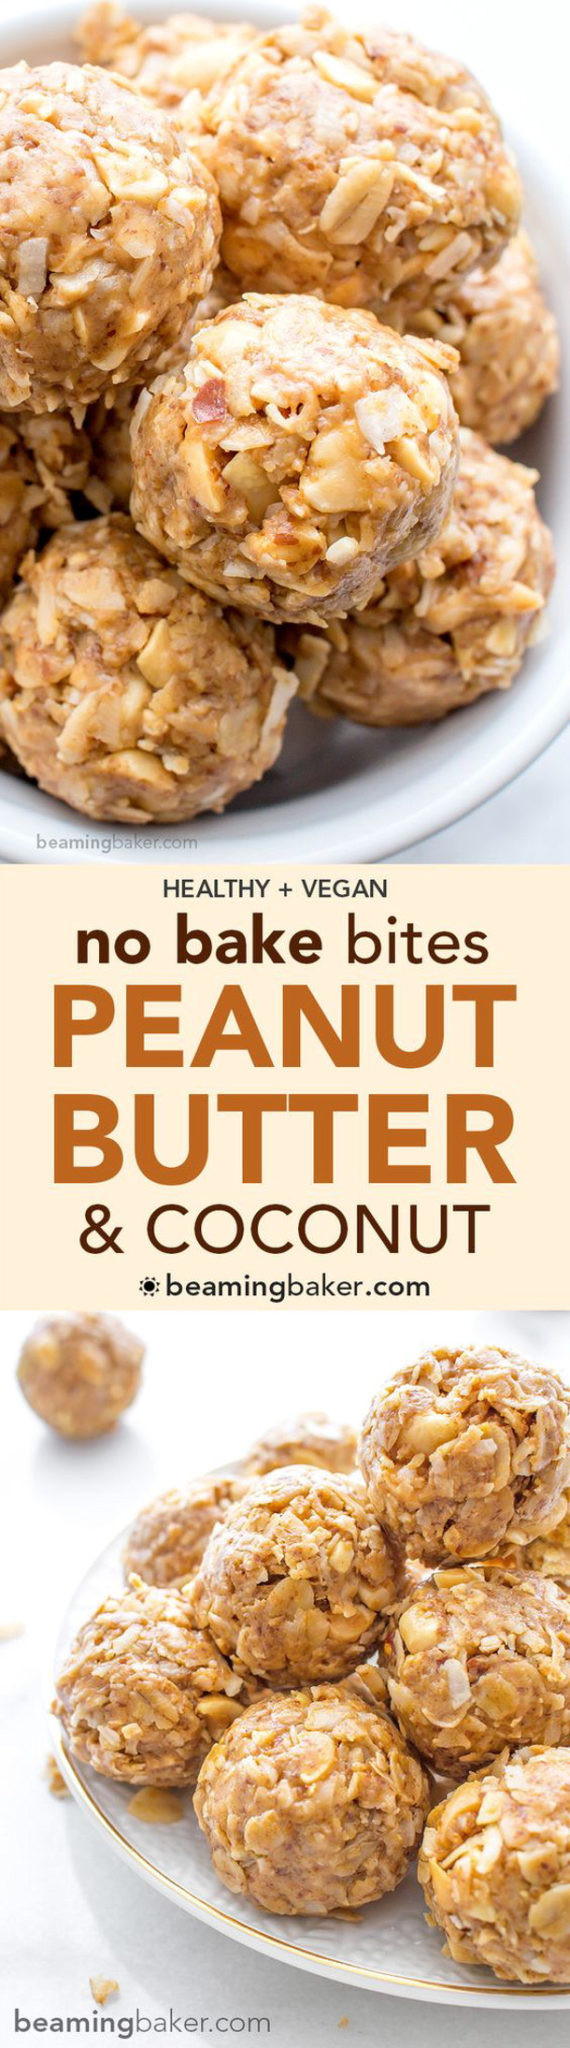 Peanut Butter Healthy Snacks
 Healthy Snacks and Treats Recipes The BEST and Yummiest